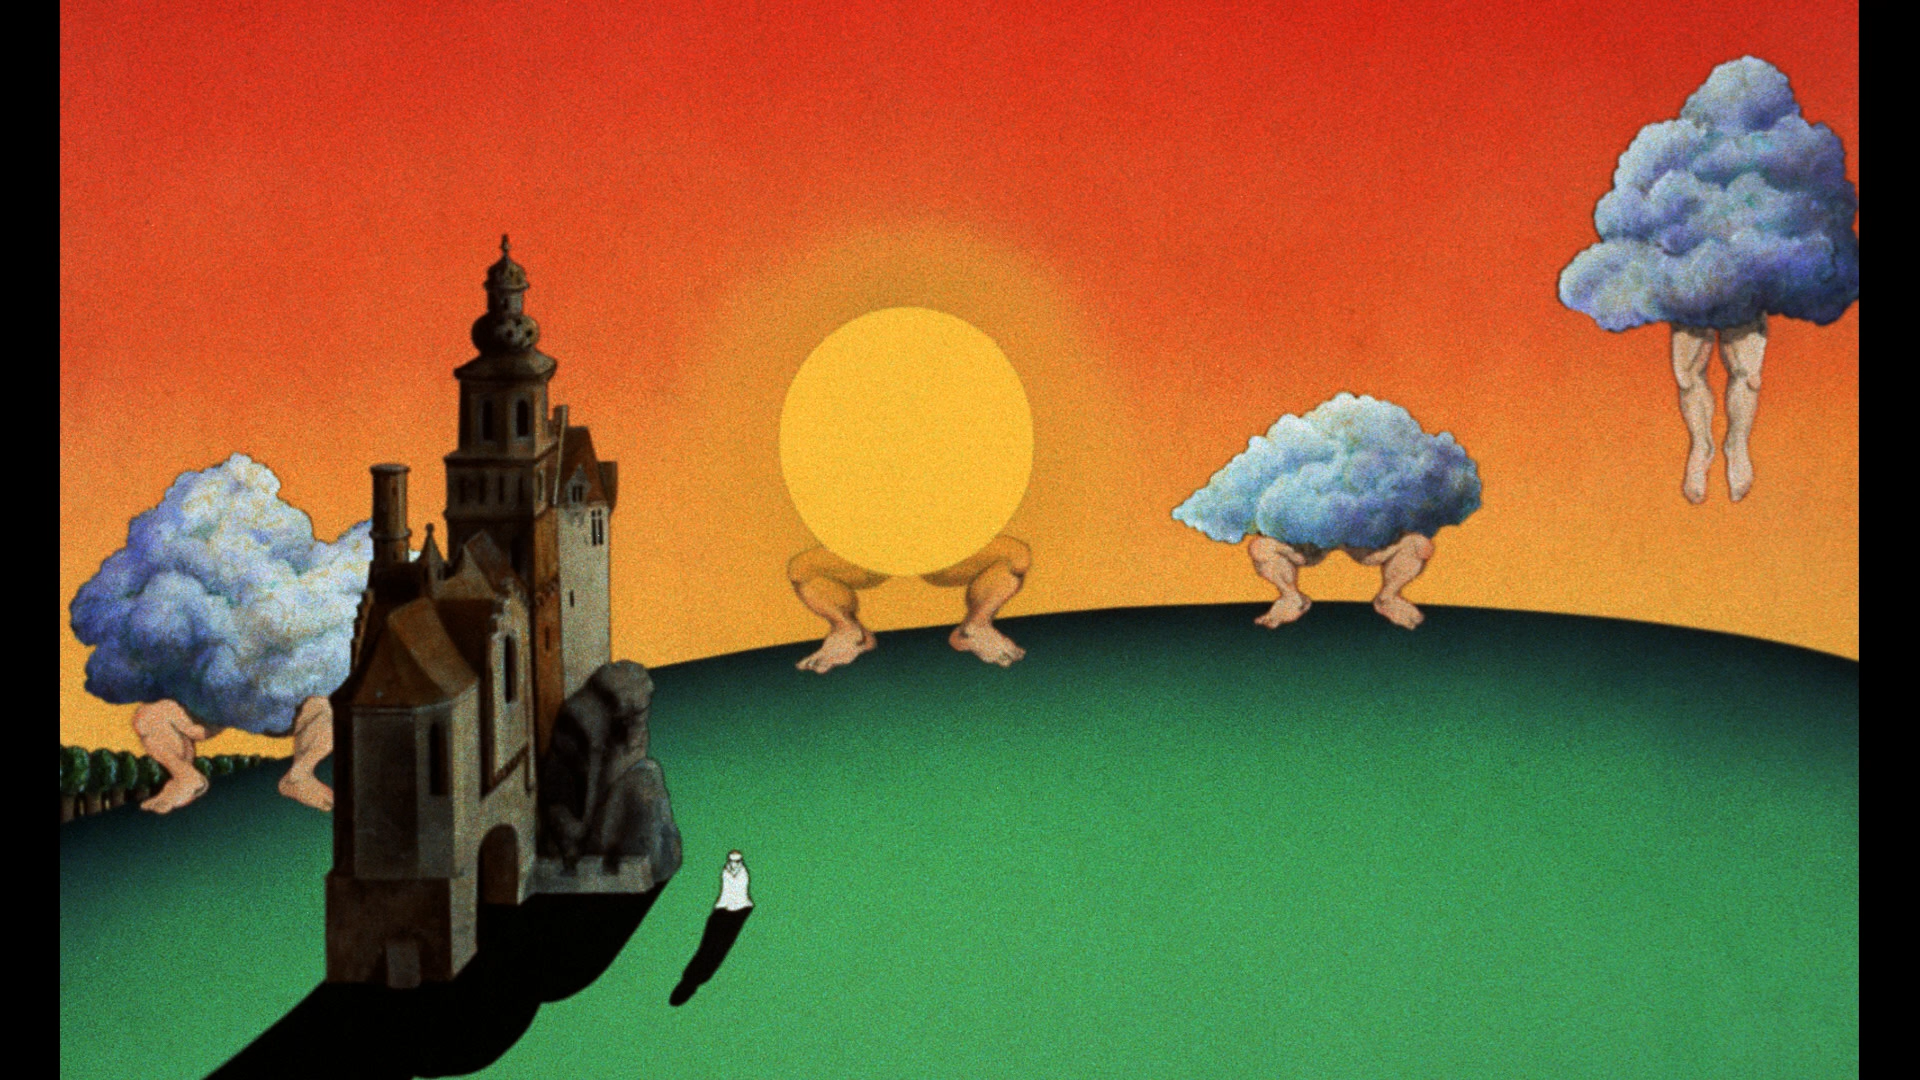 Monty Python's Flying Circus Wallpapers | Just Good Vibe